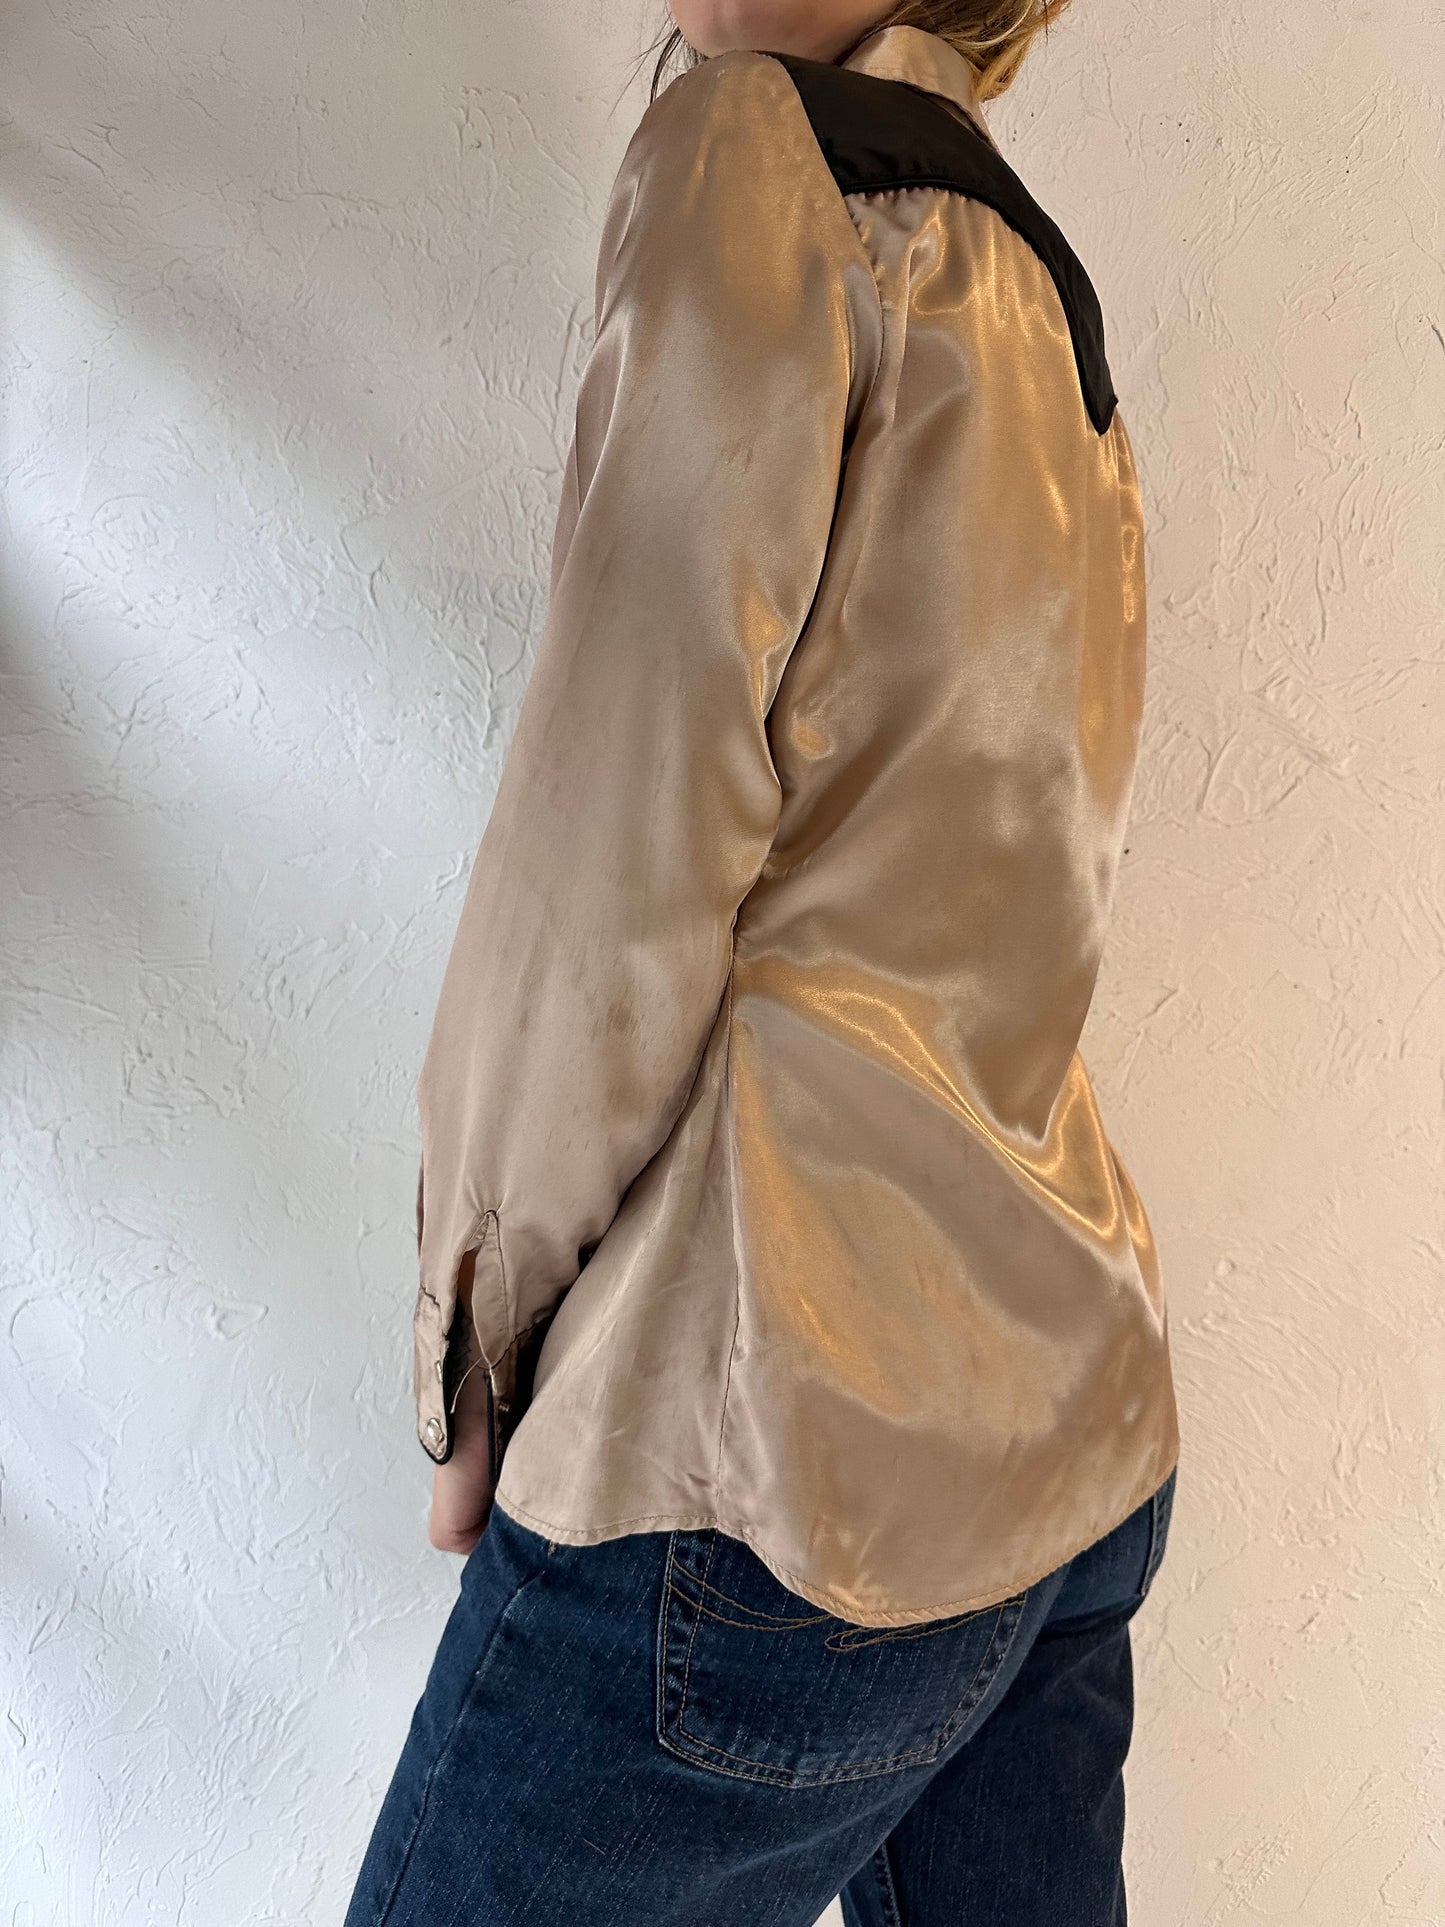 Vintage 'Kenny Rogers' Silky Pearl Snap Western Shirt / Small